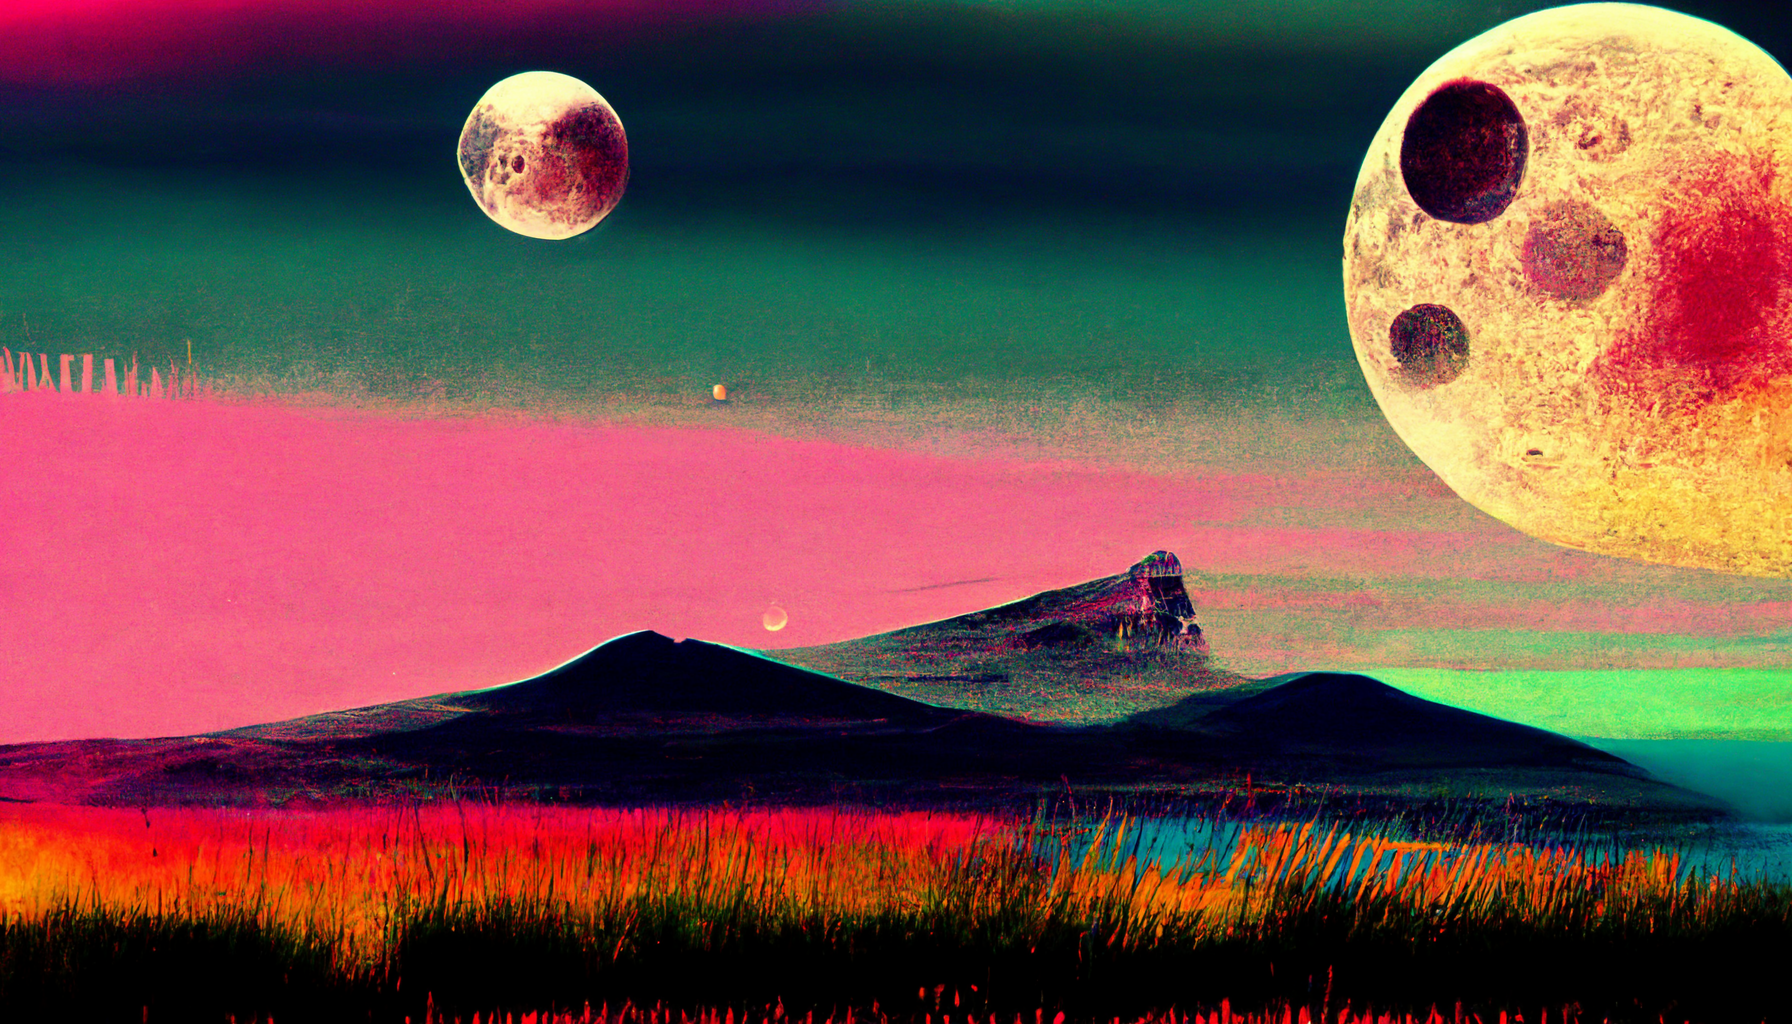 A third AI-generated image of a dreamy 80s landscape with two moons